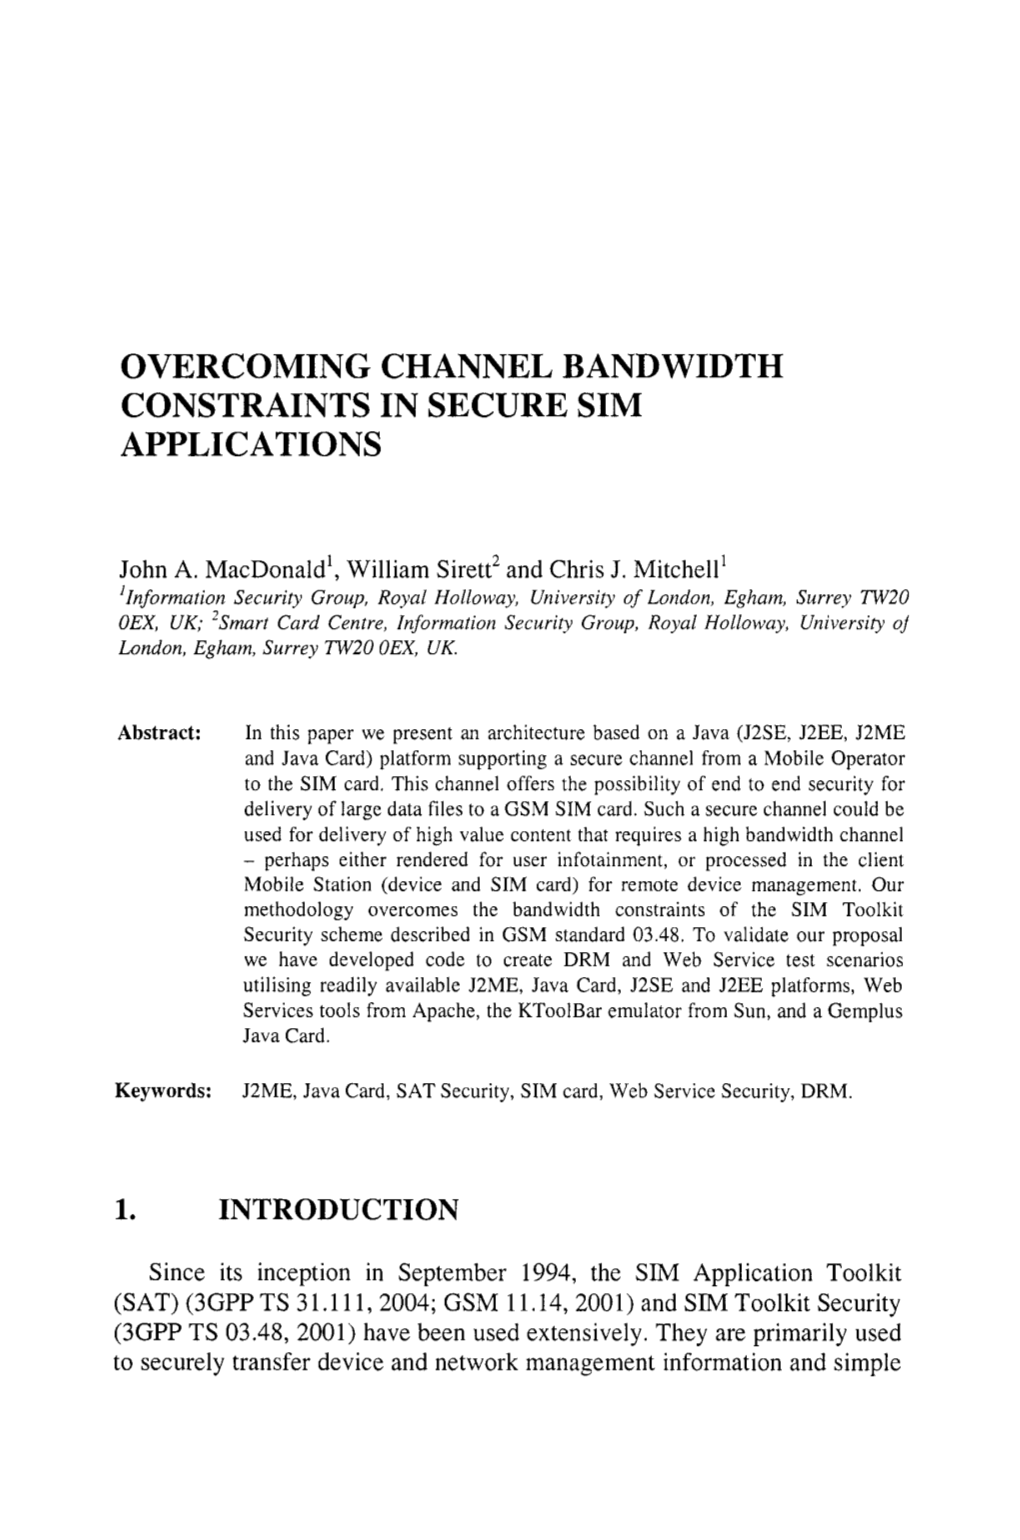 Overcoming Channel Bandwidth Constraints in Secure Sim Applications